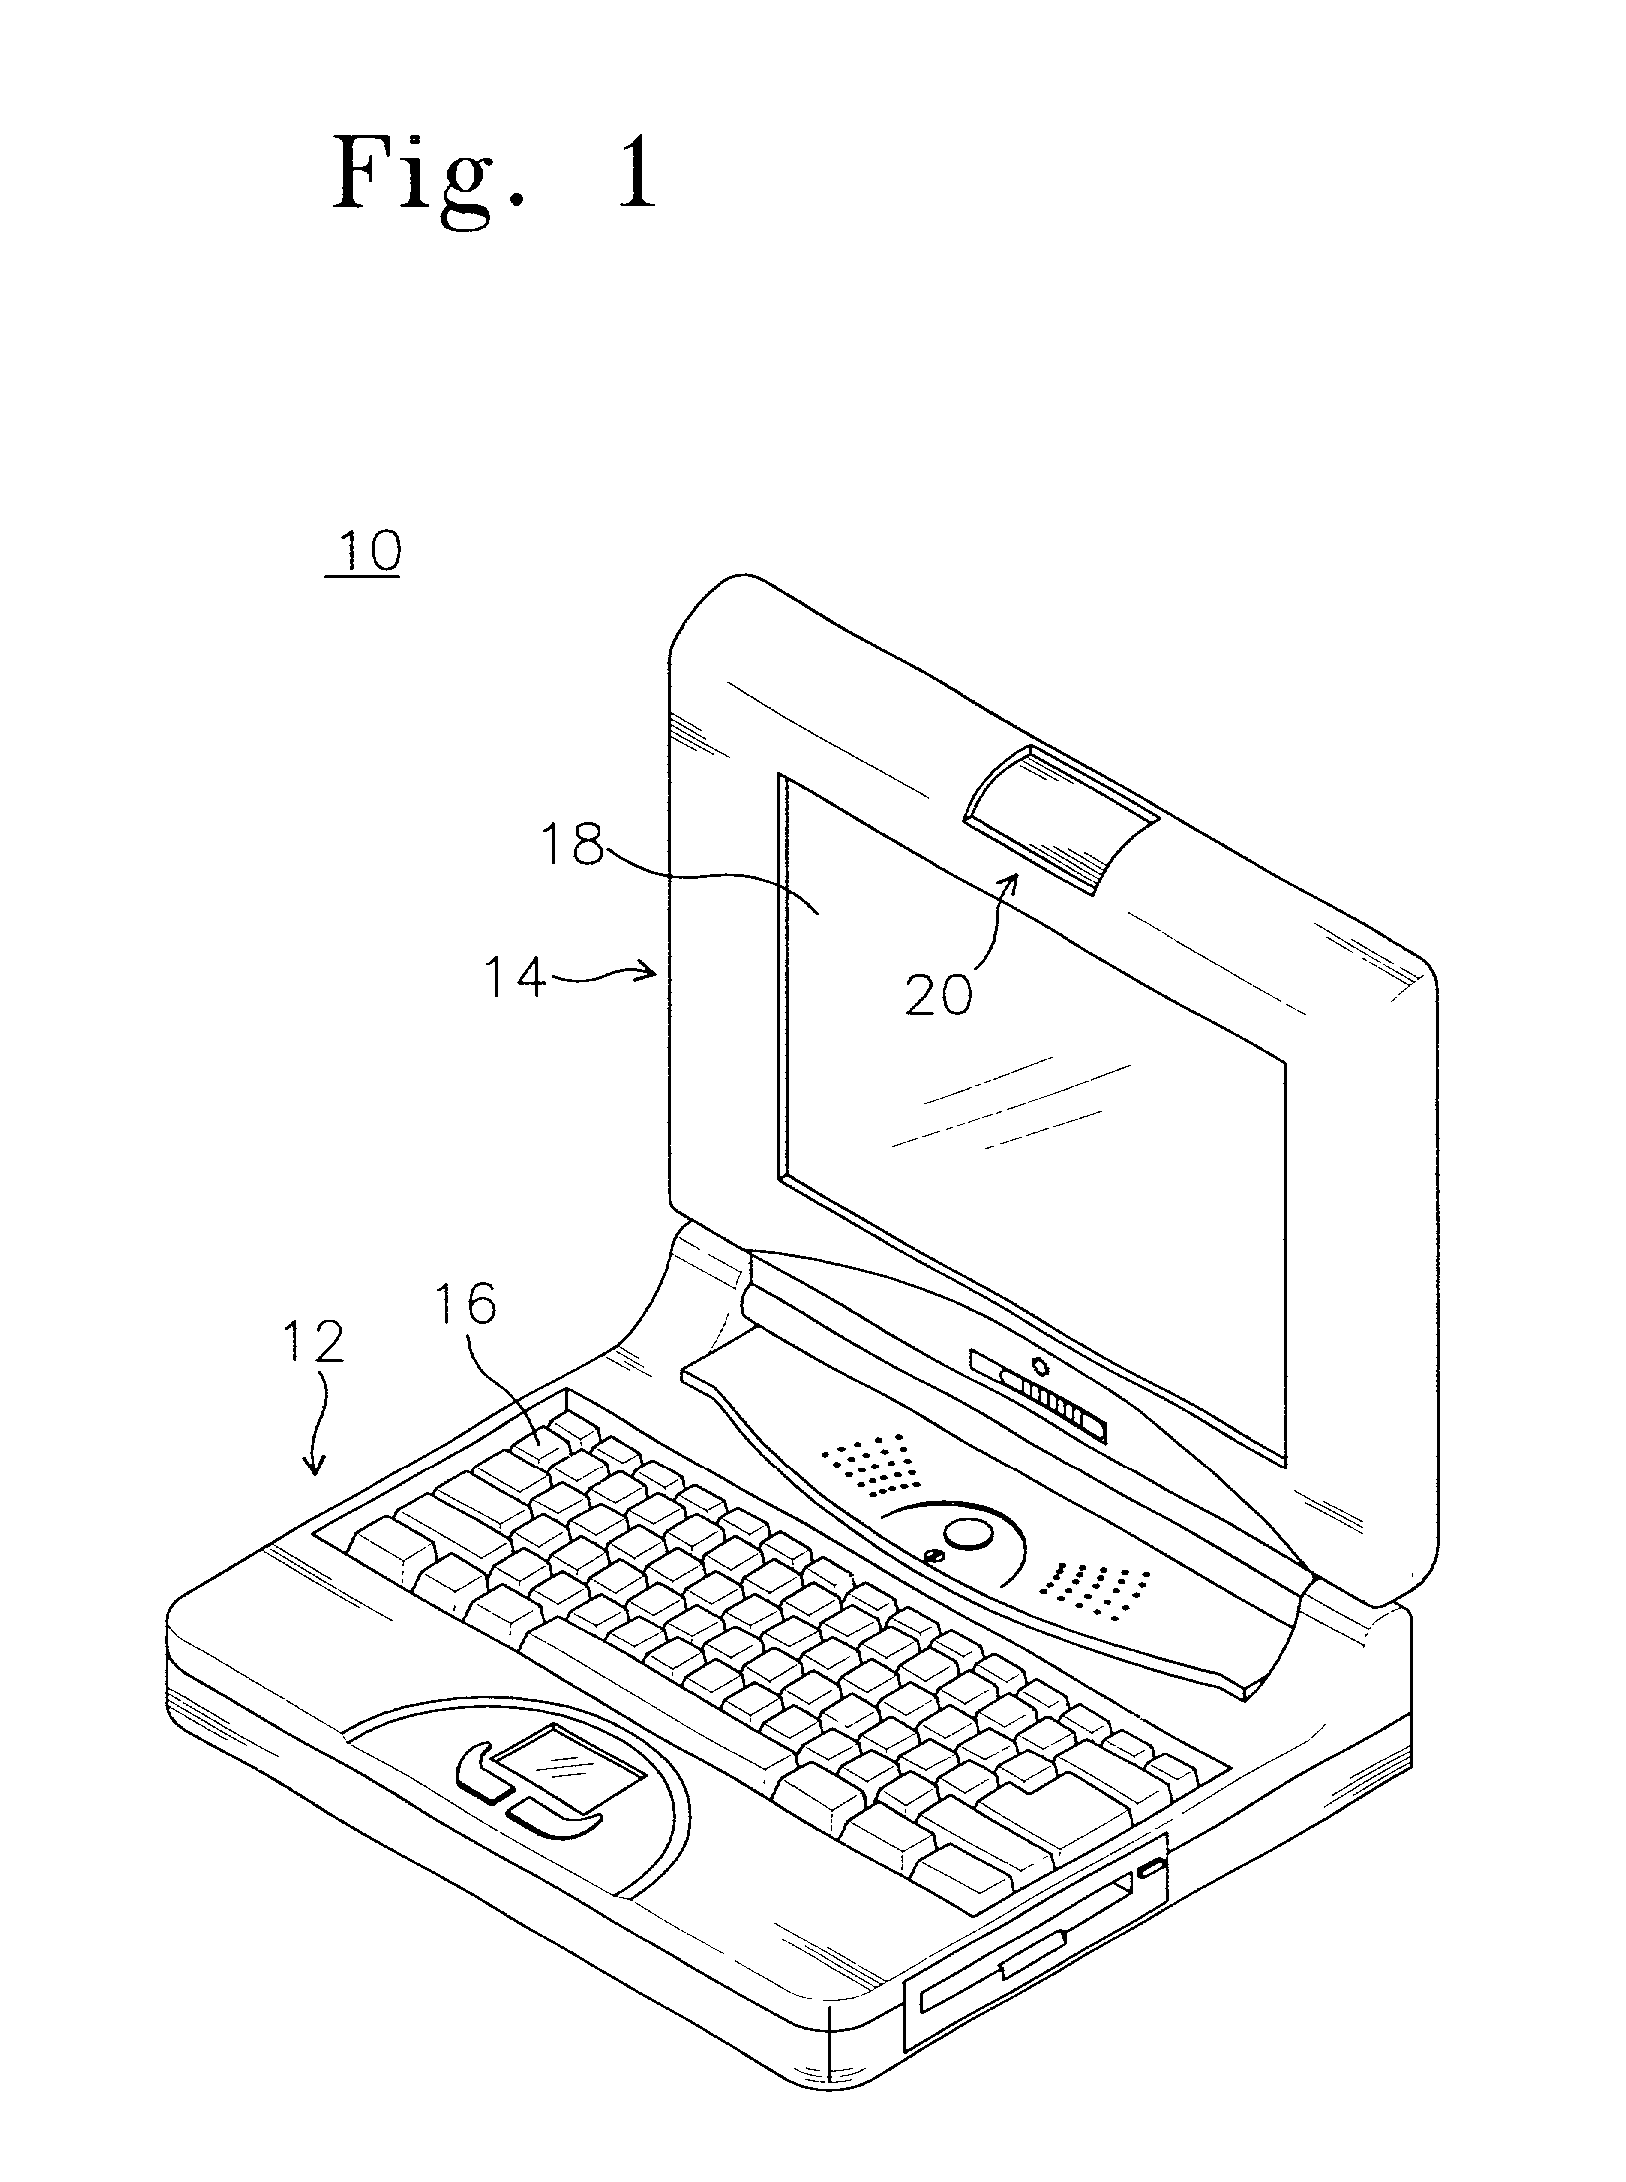 Portable computer for infrared data communication